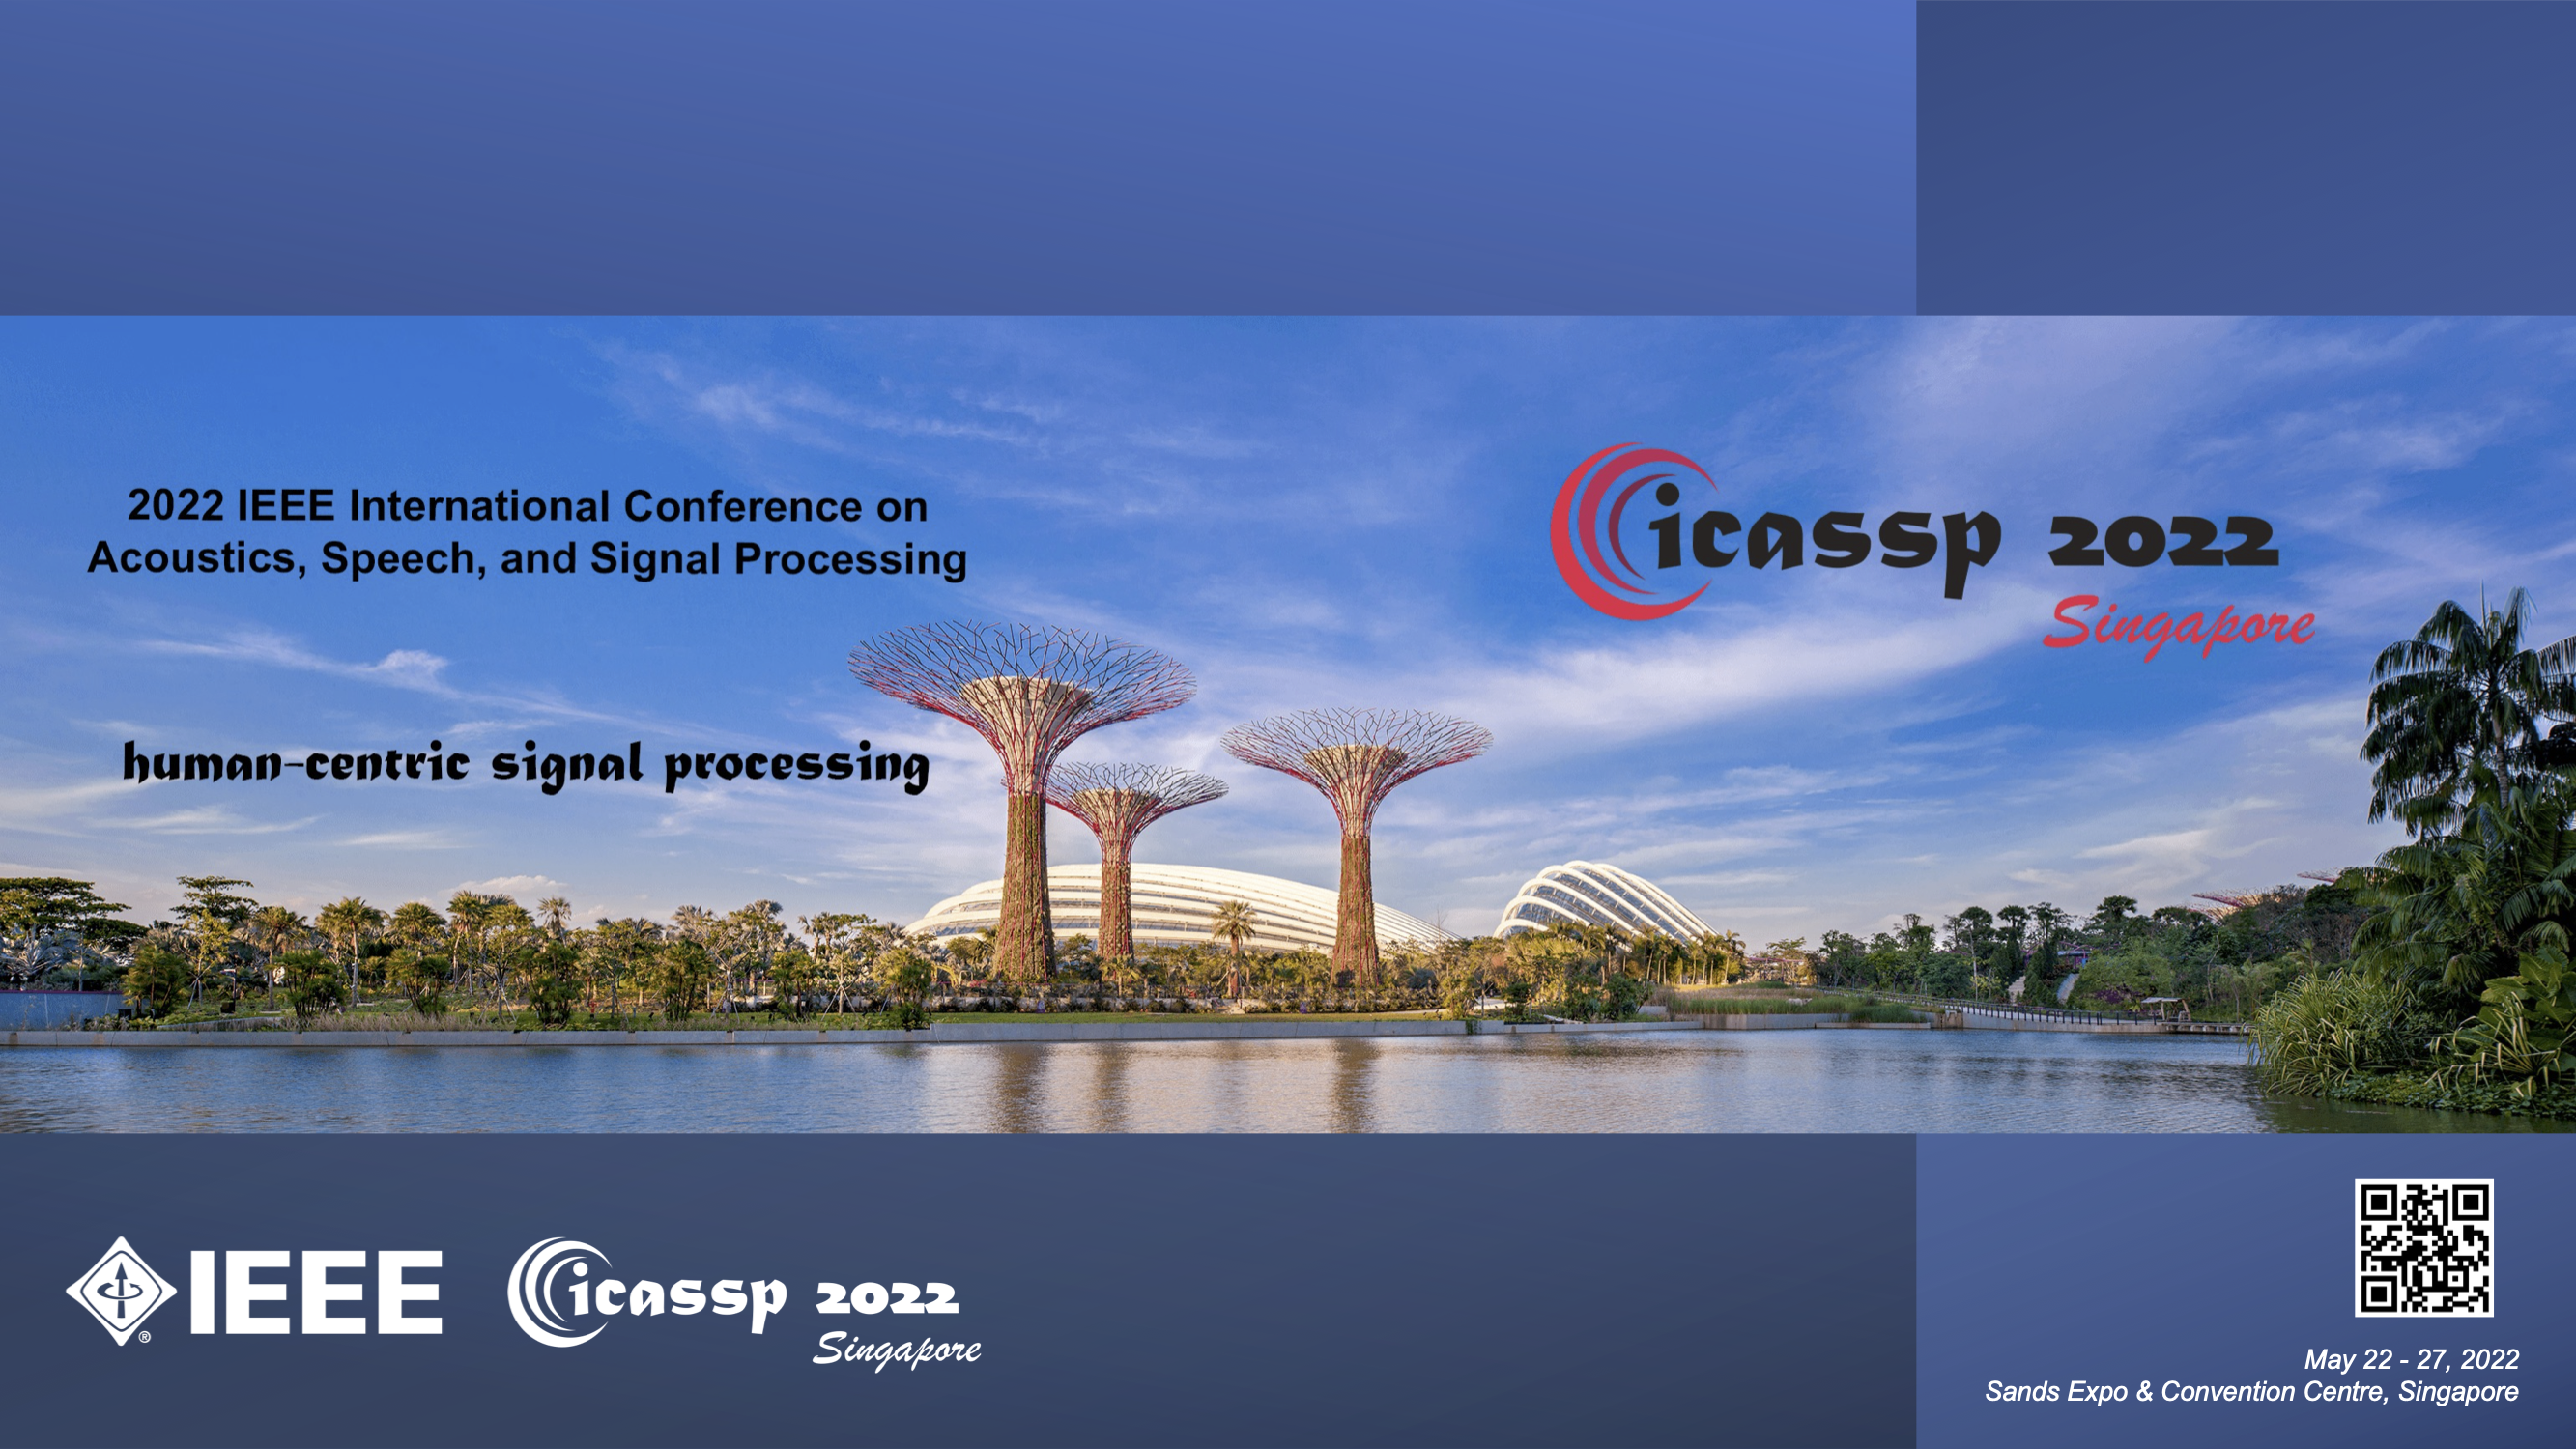 NTERNATIONAL CONFERENCE ON ACOUSTICS SPEECH AND SIGNAL PROCESSING - ICASSP 2022